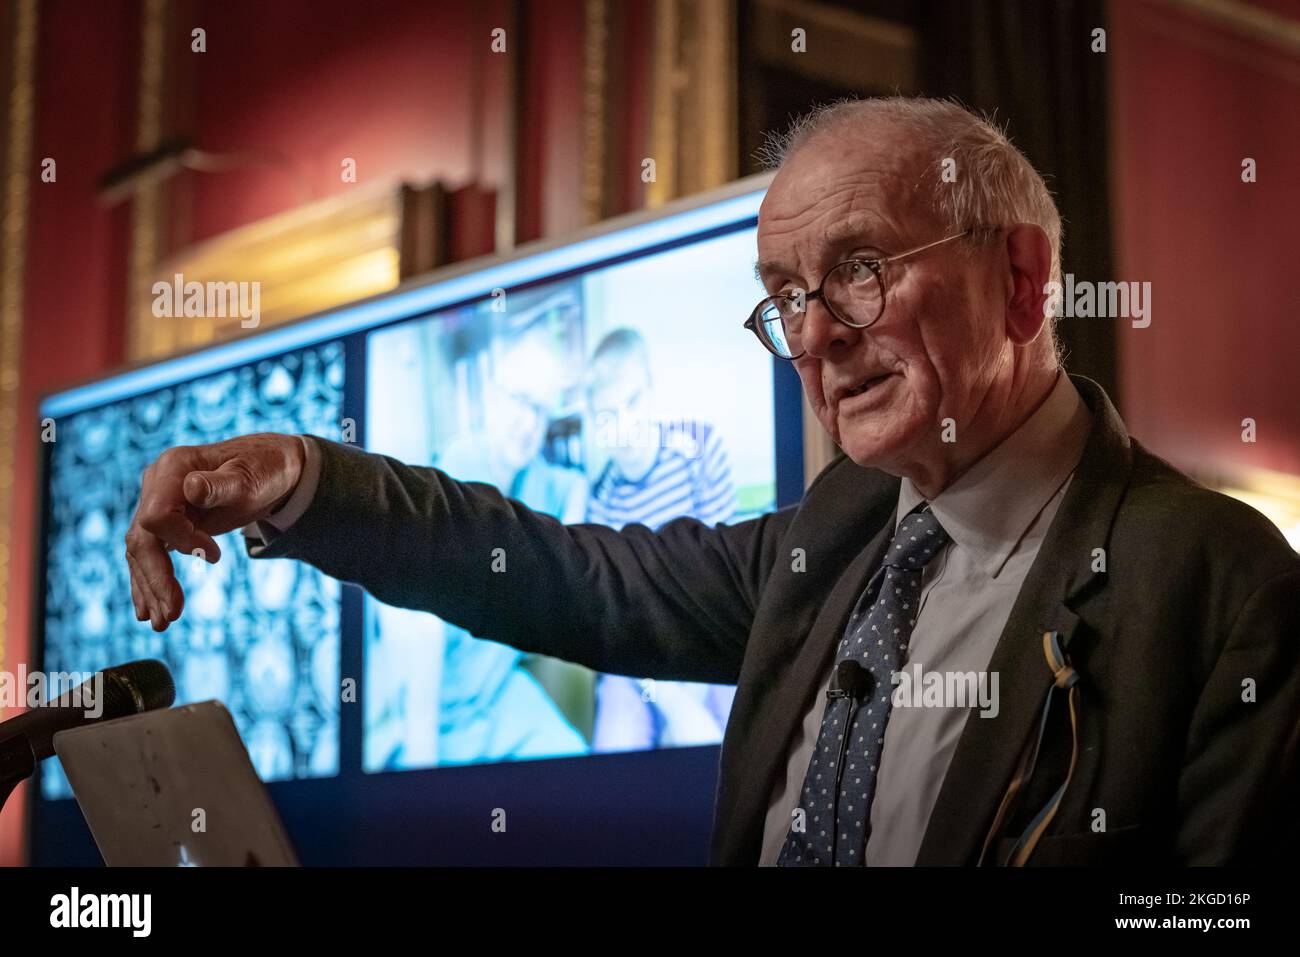 London, UK. 22nd November 2022. Henry Marsh CBE FRCS, English neurosurgeon, and a pioneer of neurosurgical advances in Ukraine, speaks at a Ukrainian fundraising event at The Reform Club in Pall Mall. Organised by Ukrainian Institute London, Henry Marsh recounts his extraordinary 30 years of neurosurgery in Ukraine and signs copies of his most recent book: And Finally: Matters of Life and Death which explores his bewildering transition from doctor to patient. Credit: Guy Corbishley/Alamy Live News Stock Photo